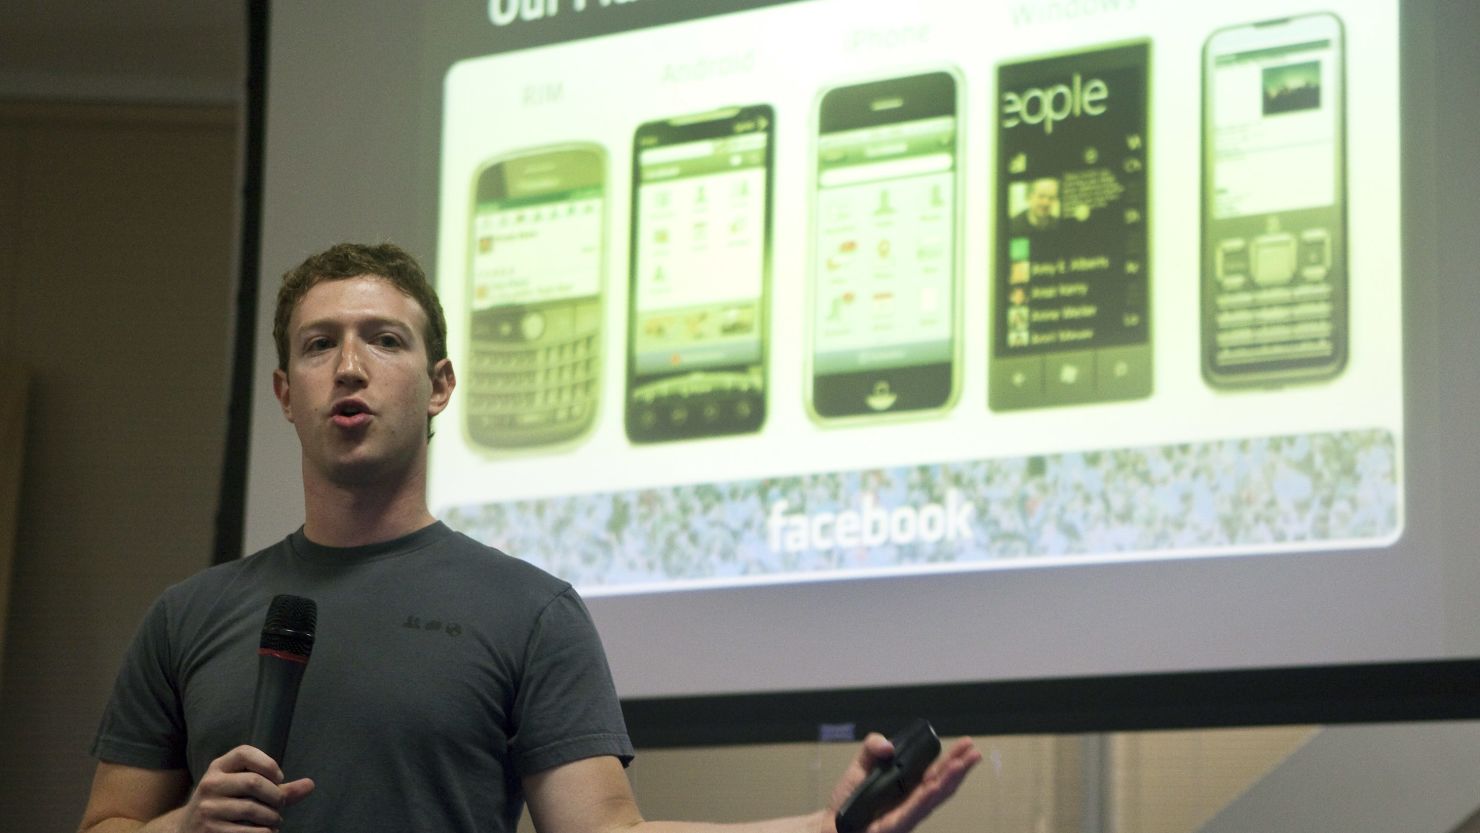 Facebook CEO Mark Zuckerberg wants his apps to be on all phones, but they don't make money yet.